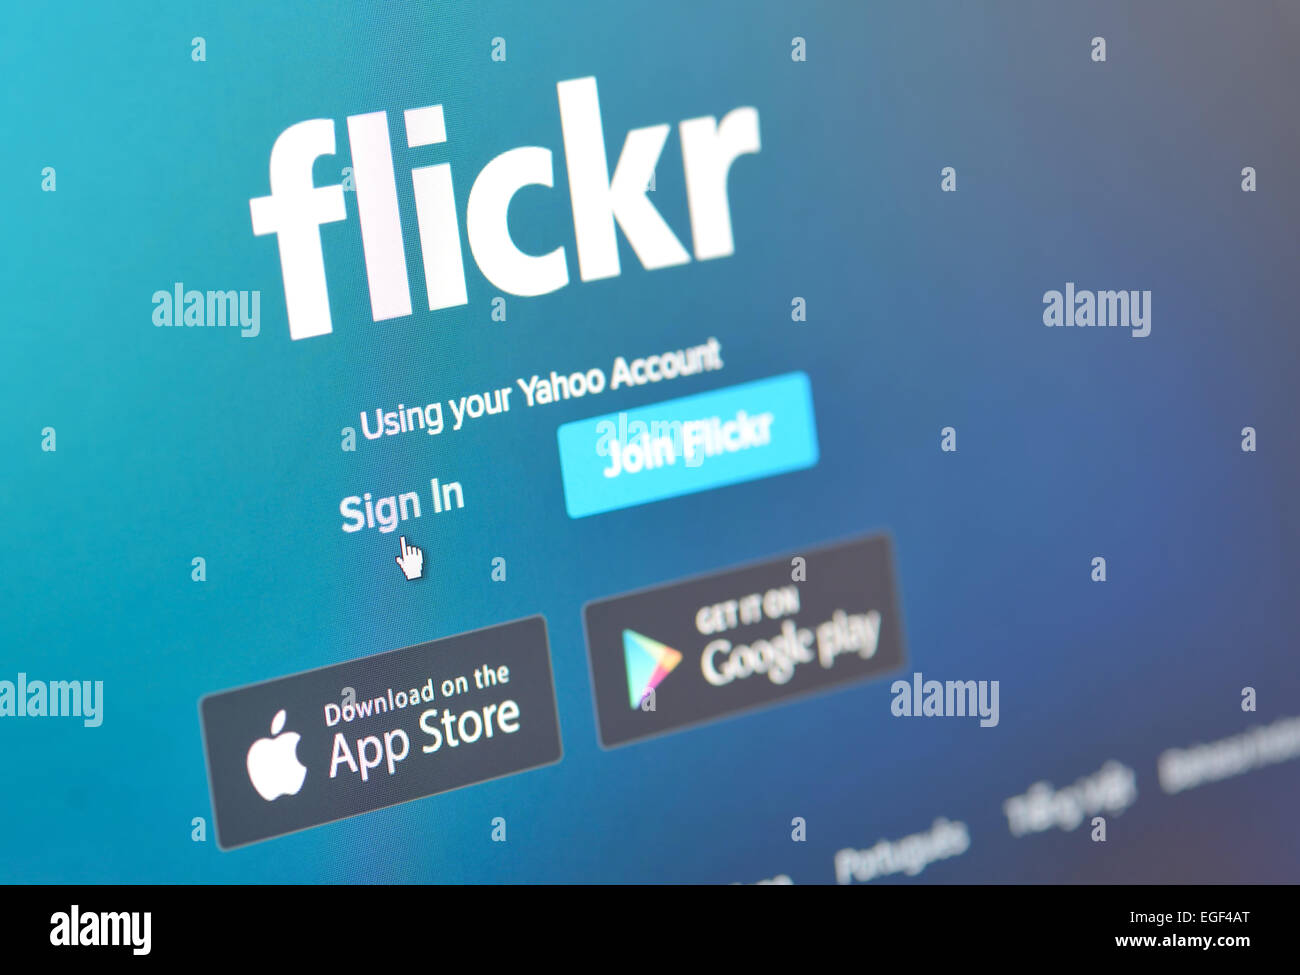 Galati, Romania, february 24, 2015, Close-up image of  Flickr webpages on a monitor screen Stock Photo